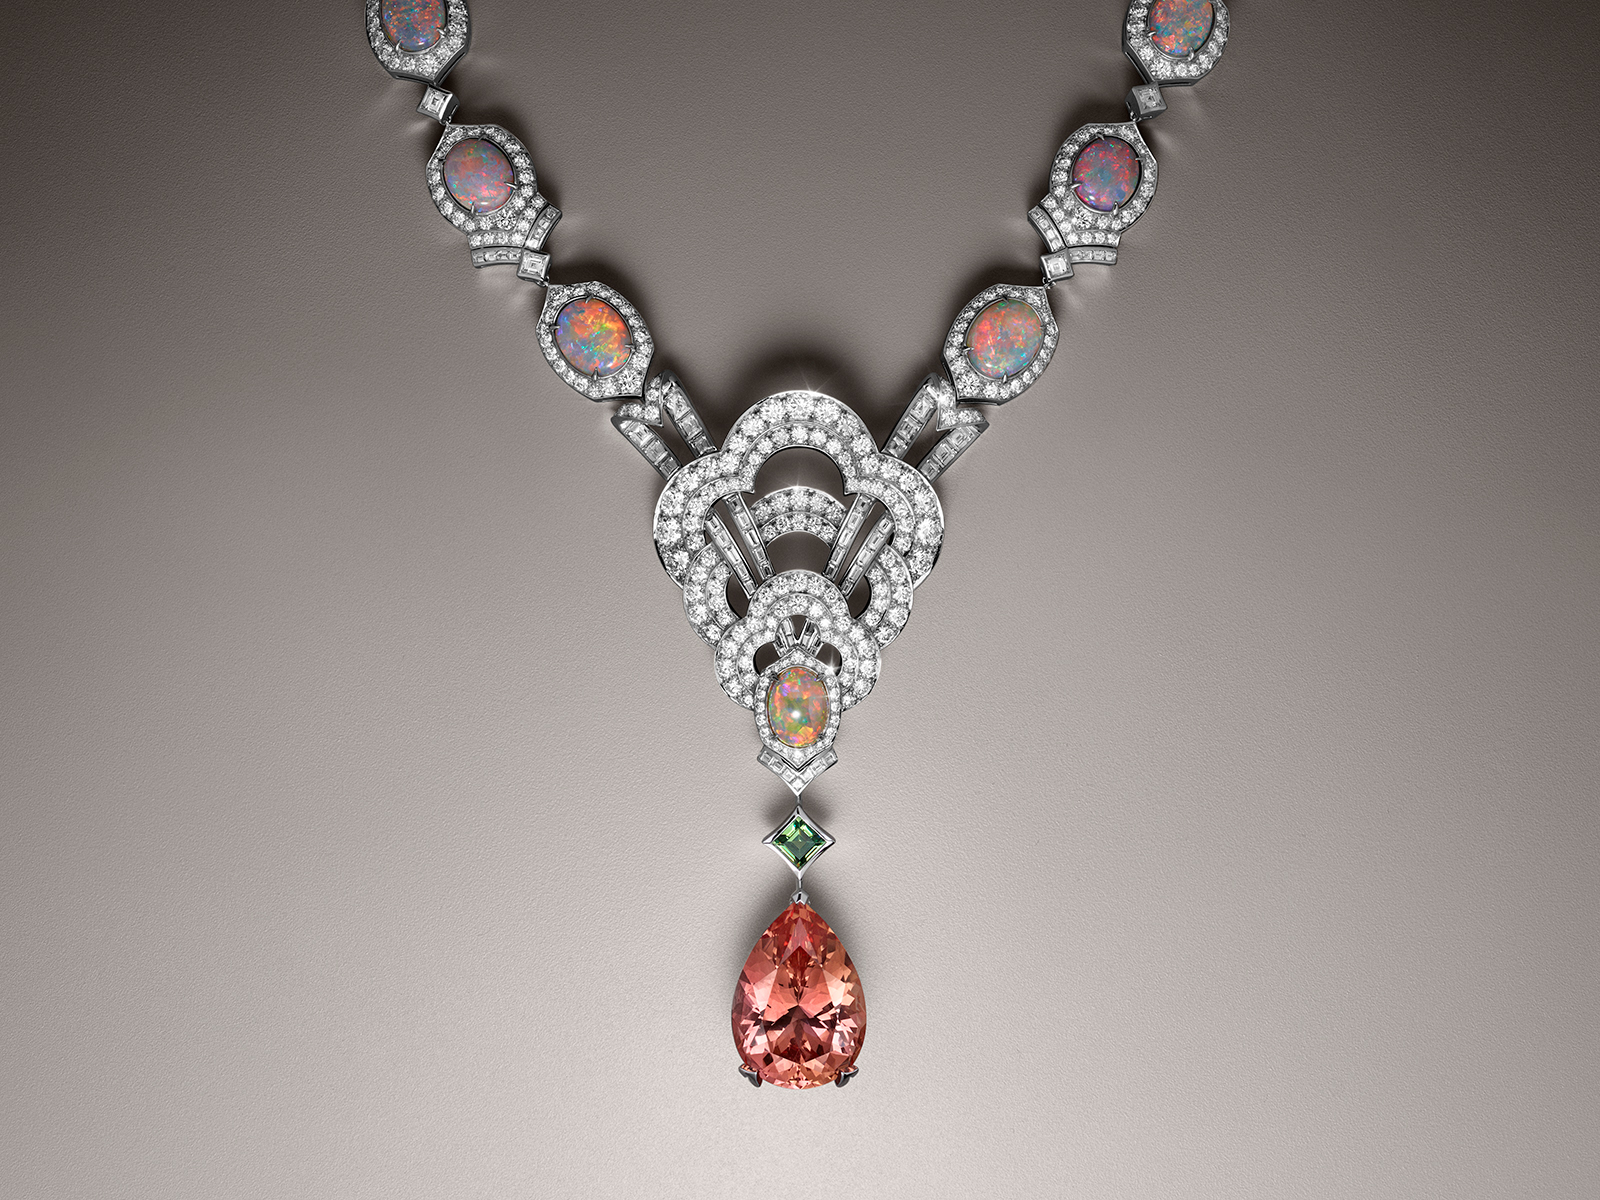 Louis Vuitton High Jewelry Necklace - 5 For Sale on 1stDibs